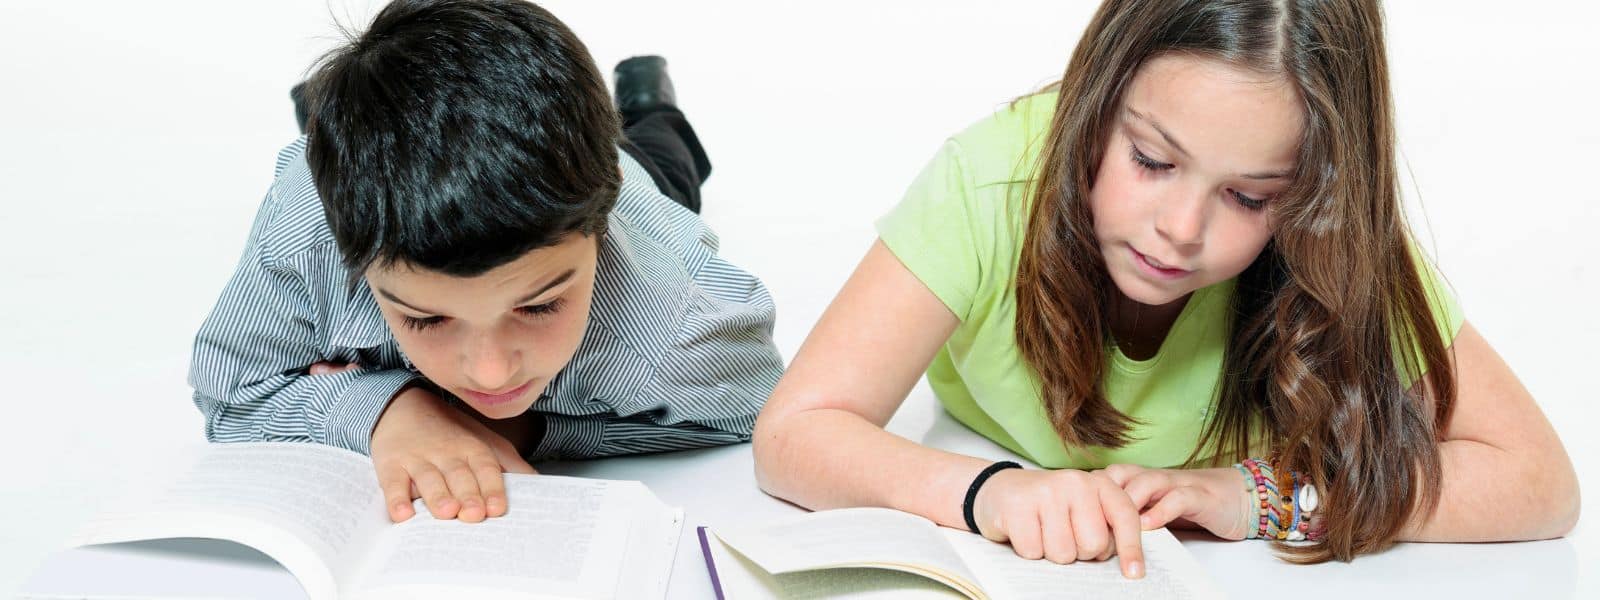 Ways to Improve Reading Fluency for Choppy or Reluctant Readers